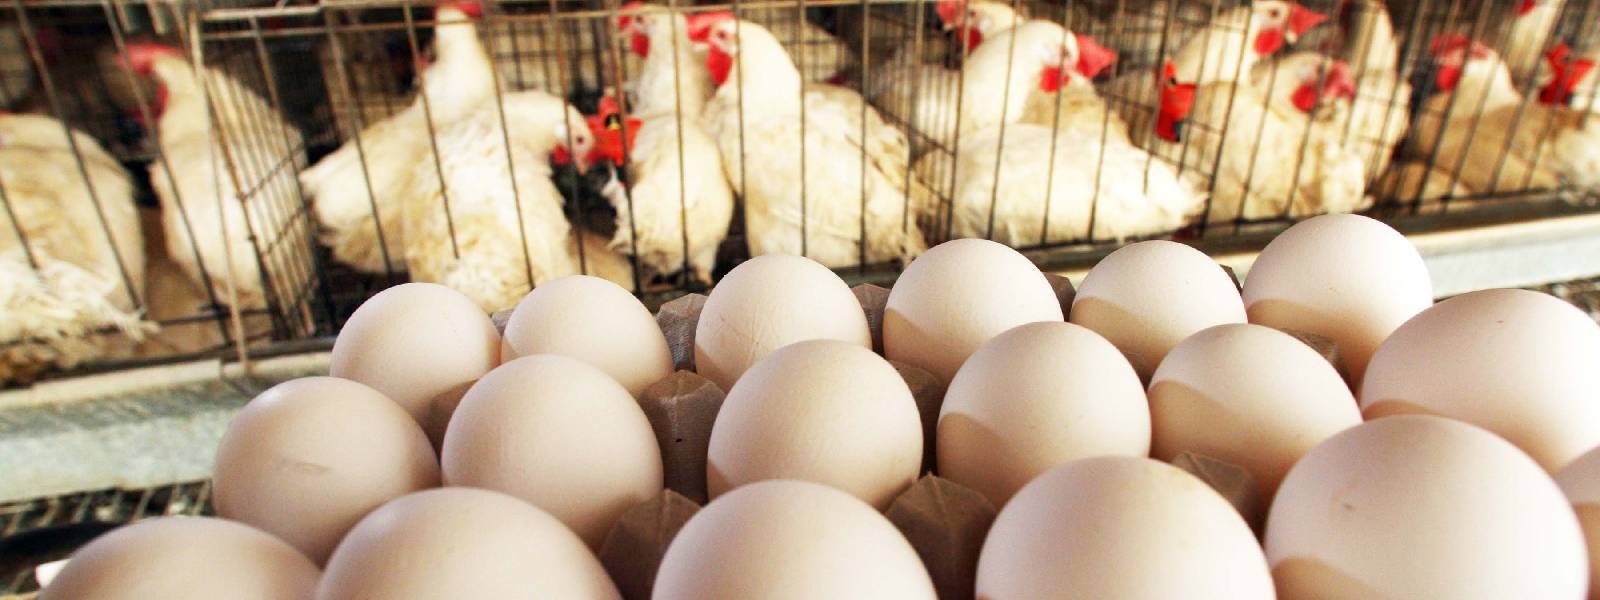 Egg production drops by 40%